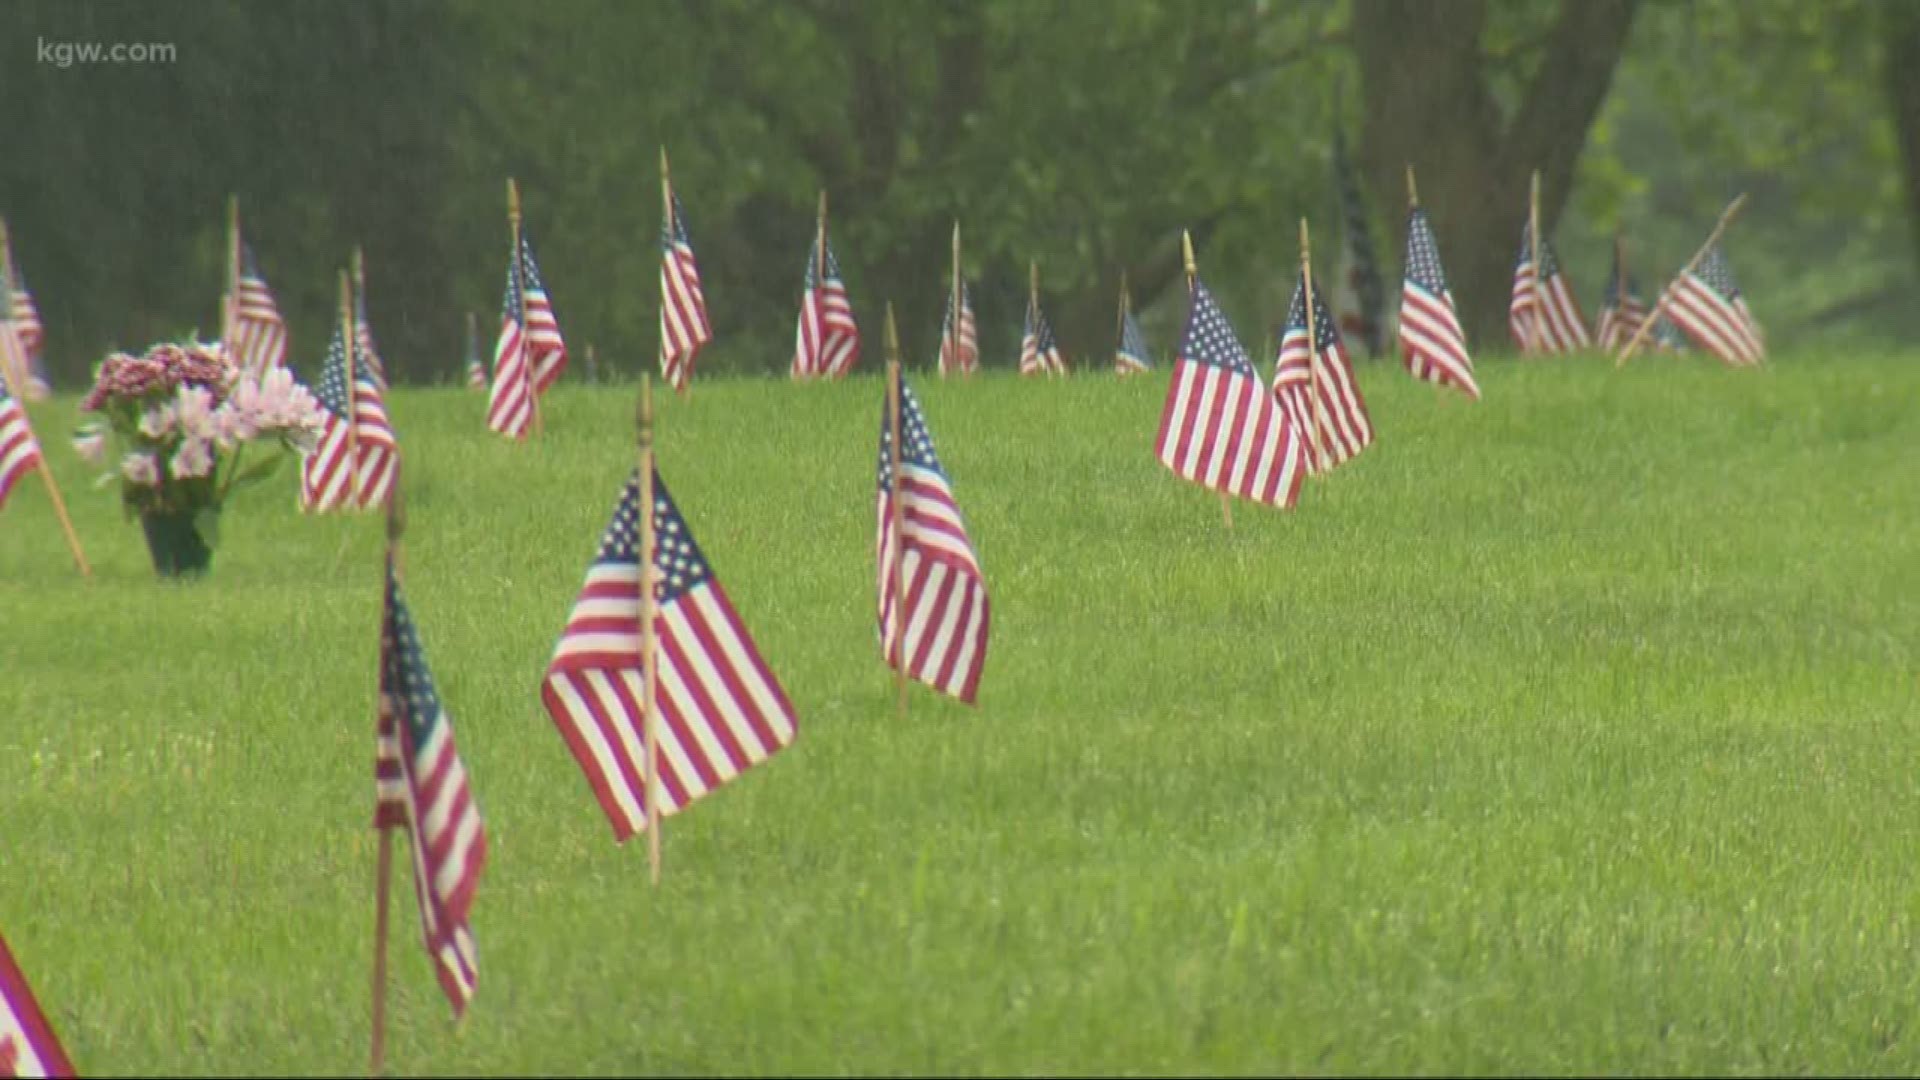 Portlanders visit Willamette National Cemetery on Memorial Day to pay respects